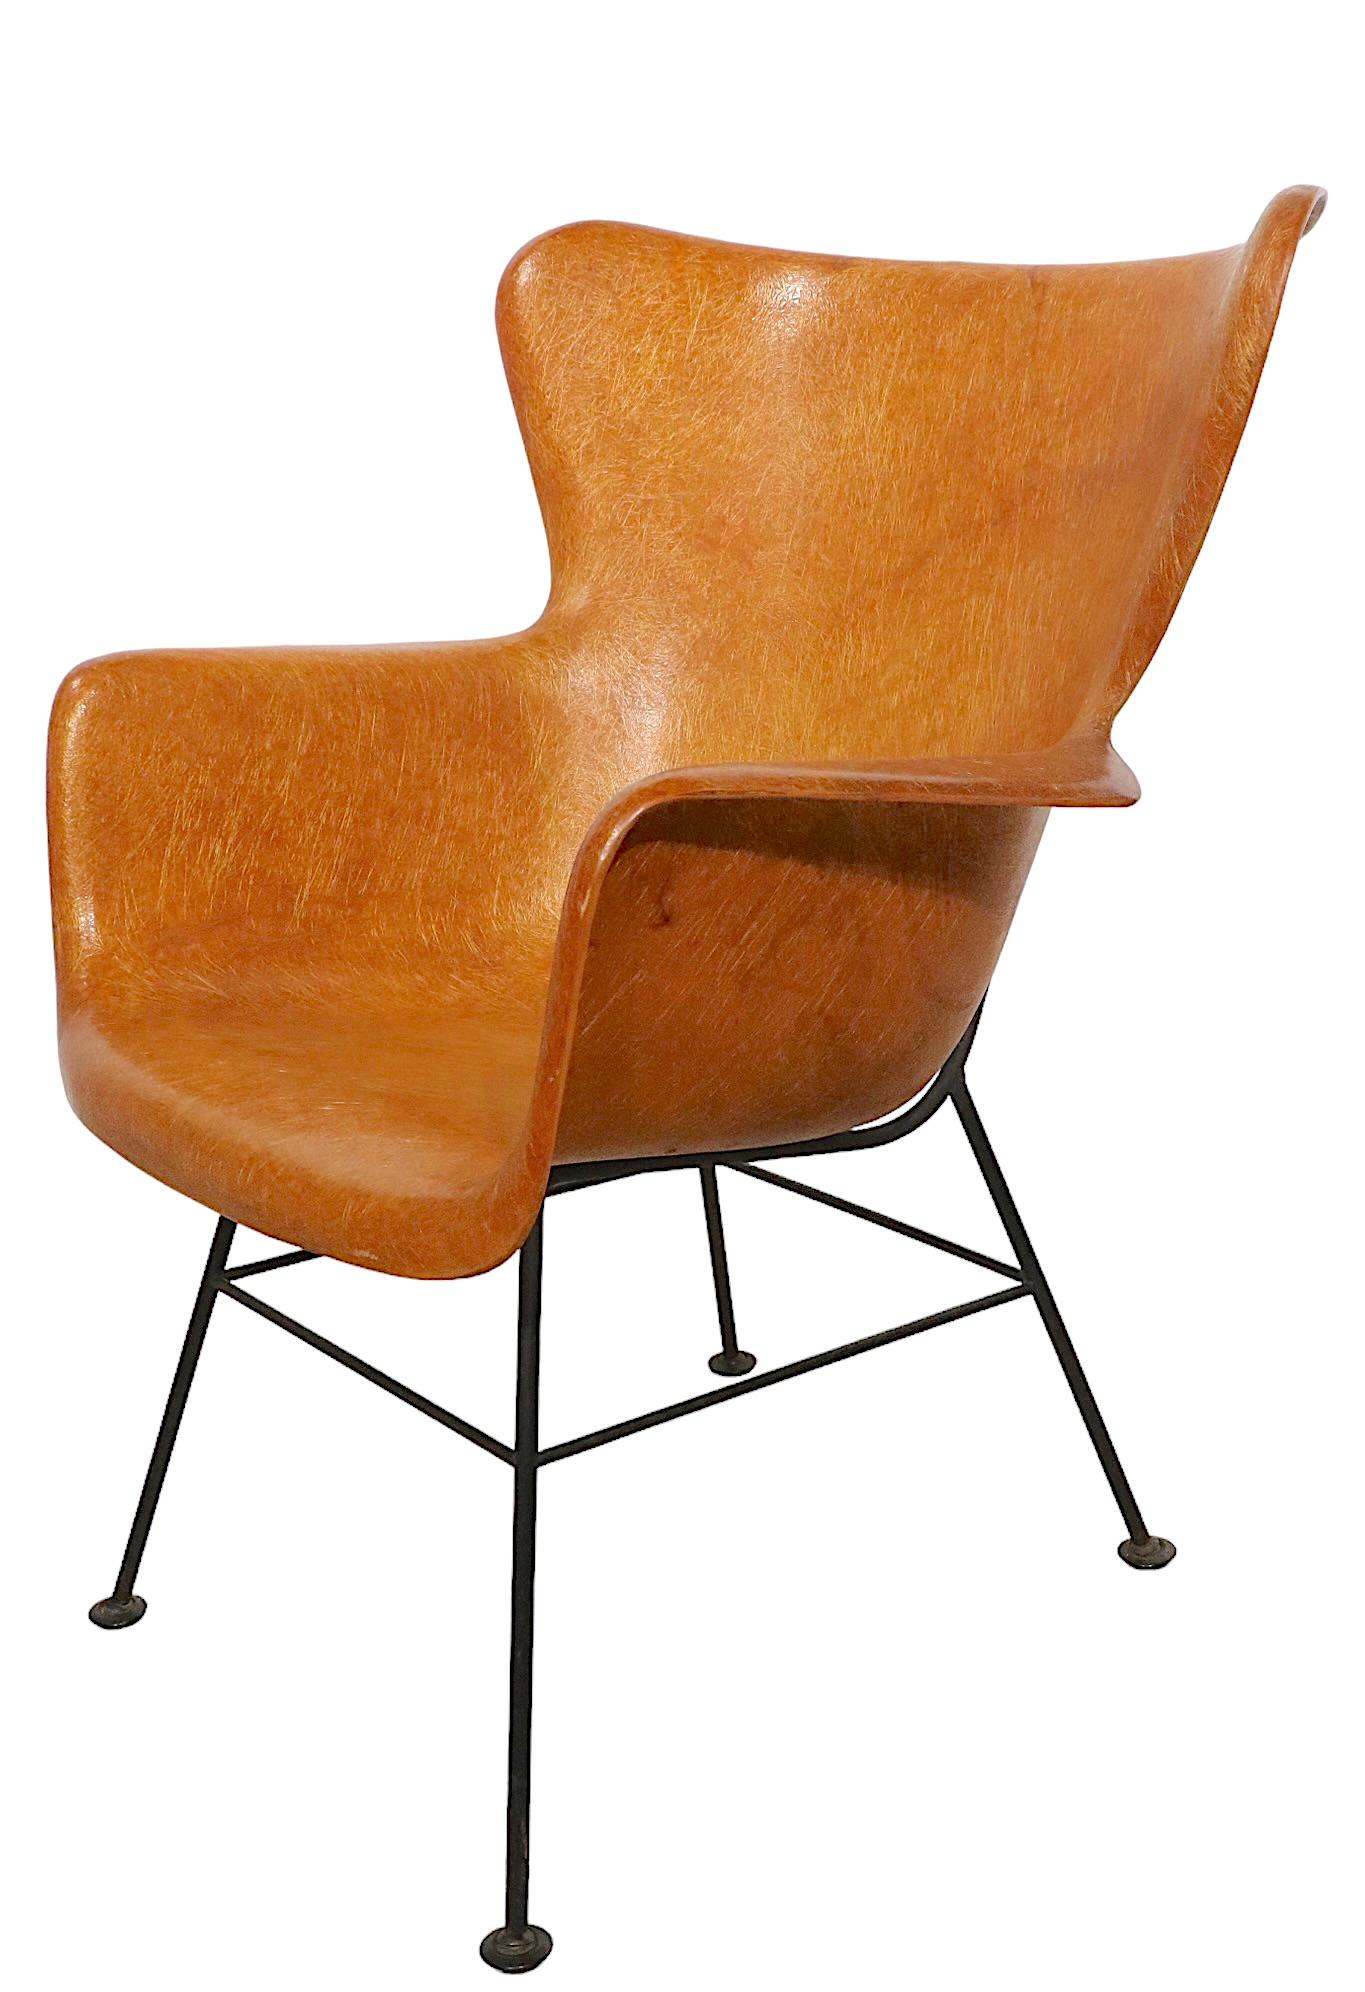 Iconic fiberglass and wrought iron modernist reinterpretation of the classic wing chair form, designed by Lawerence Peabody, manufactured by Selig, circa 1950's. 
 This example is in original, untouched vintage estate condition, showing only